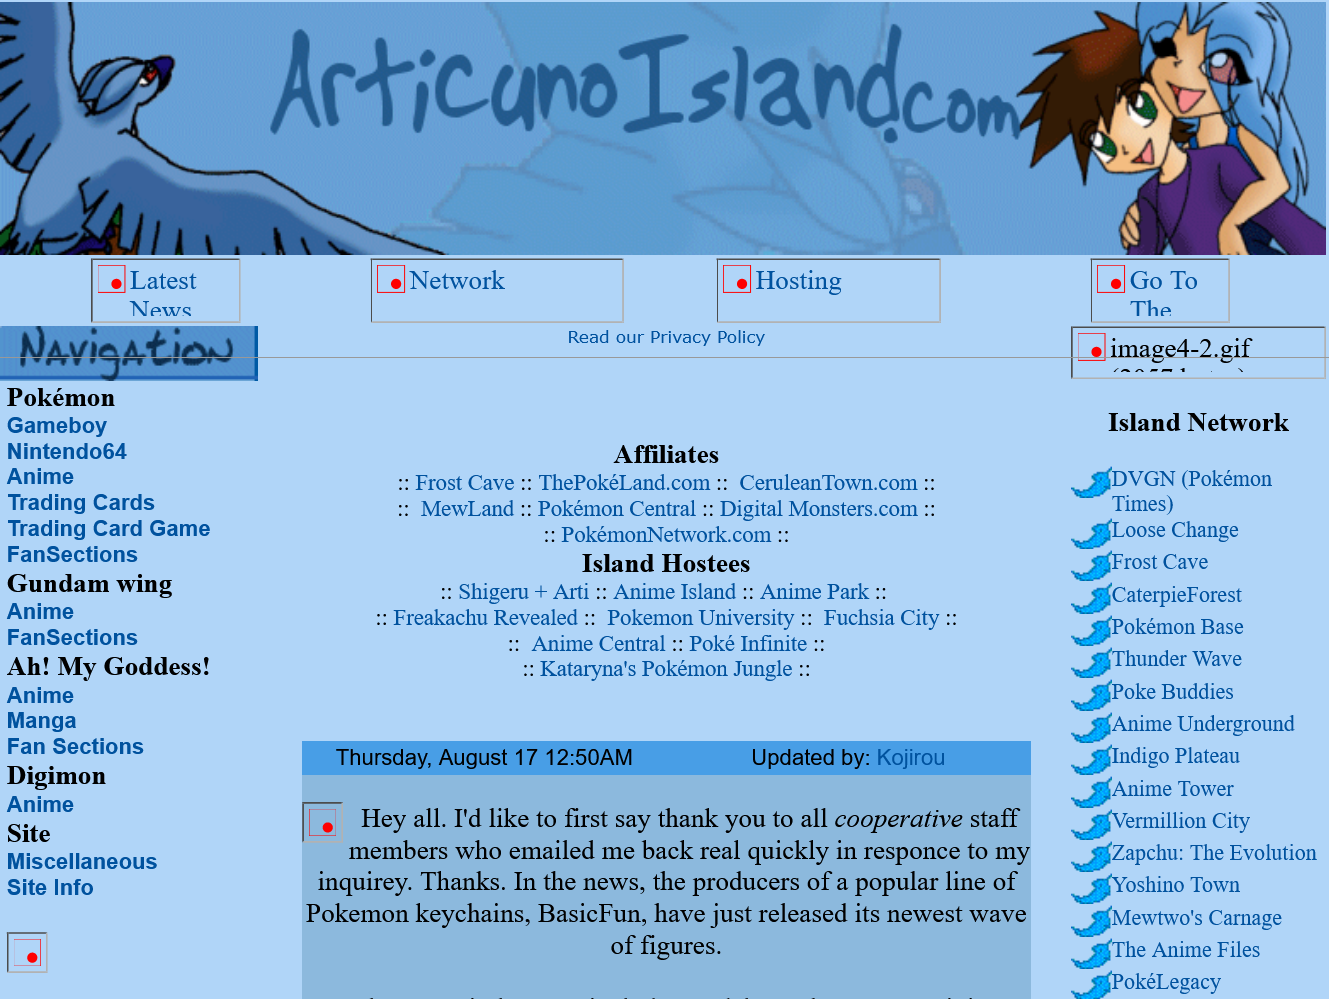 Articuno Island (snapshot from August 2000) had a network that featured dozens of Pokémon fan websites from the early era, including Serebii’s Pokémon Page (now known as Serebii.net) and Bulbagarden, two huge communities that have grown to become pillars of the Pokémon fan community to this day.